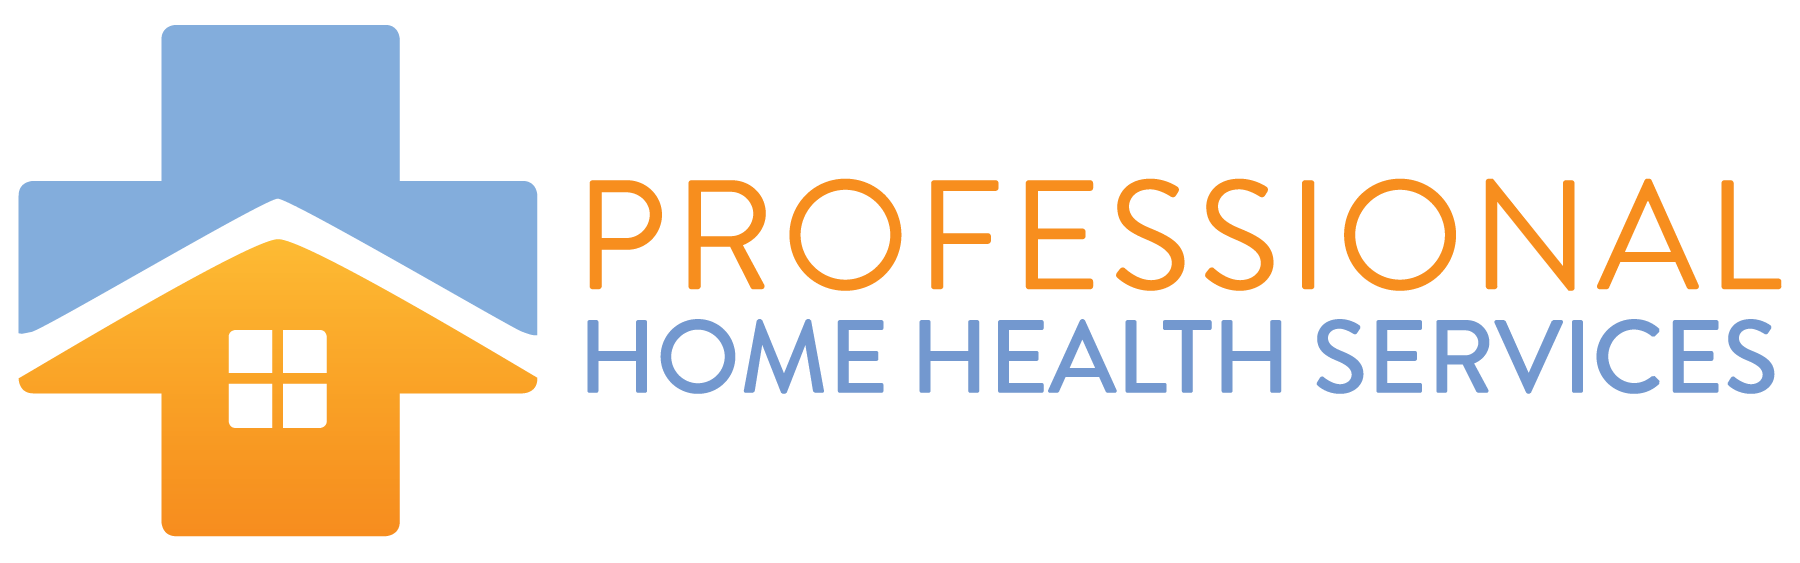 Professional Home Health Services